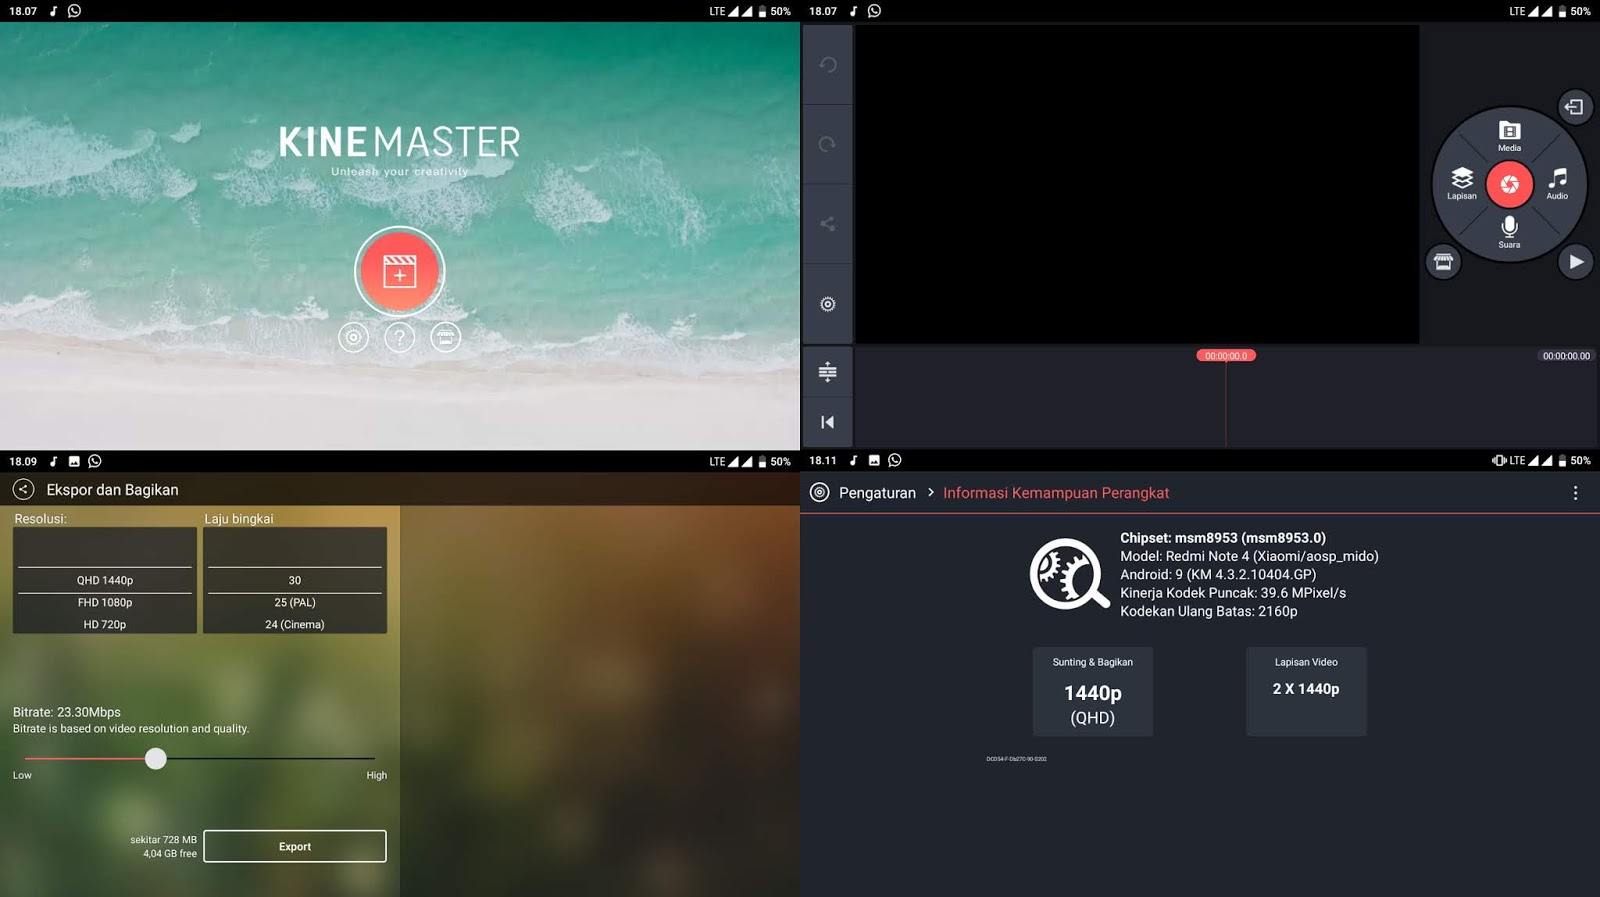 Download Kinemaster Pro APK On Android For Professional Level Video Editing